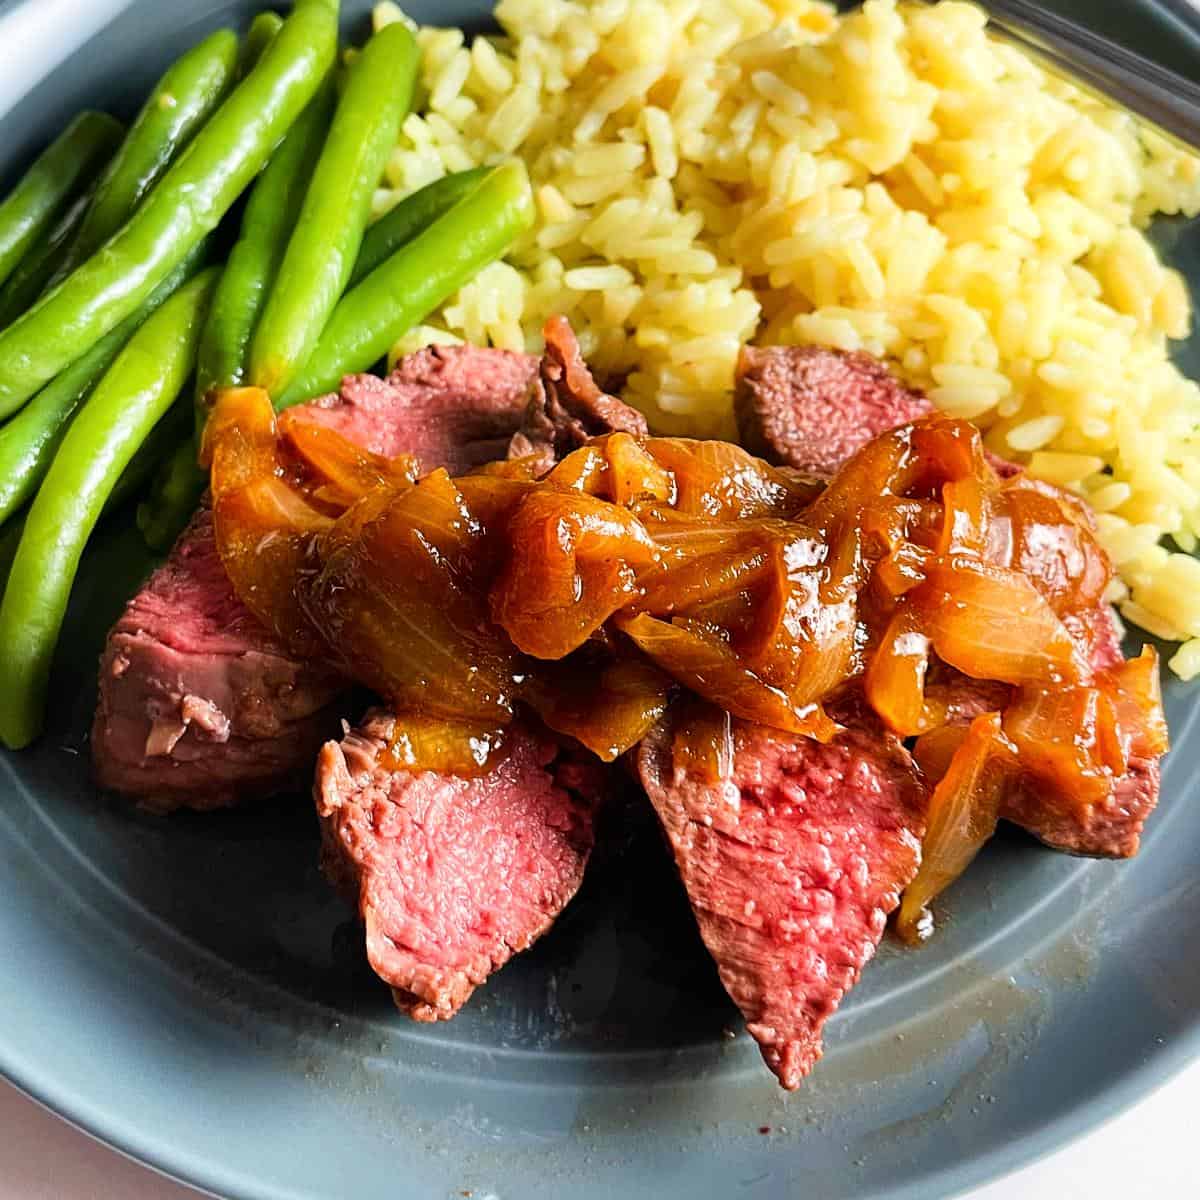 slices of oven roasted sirloin steak with onion sauce, on a plate with rice and green beans.